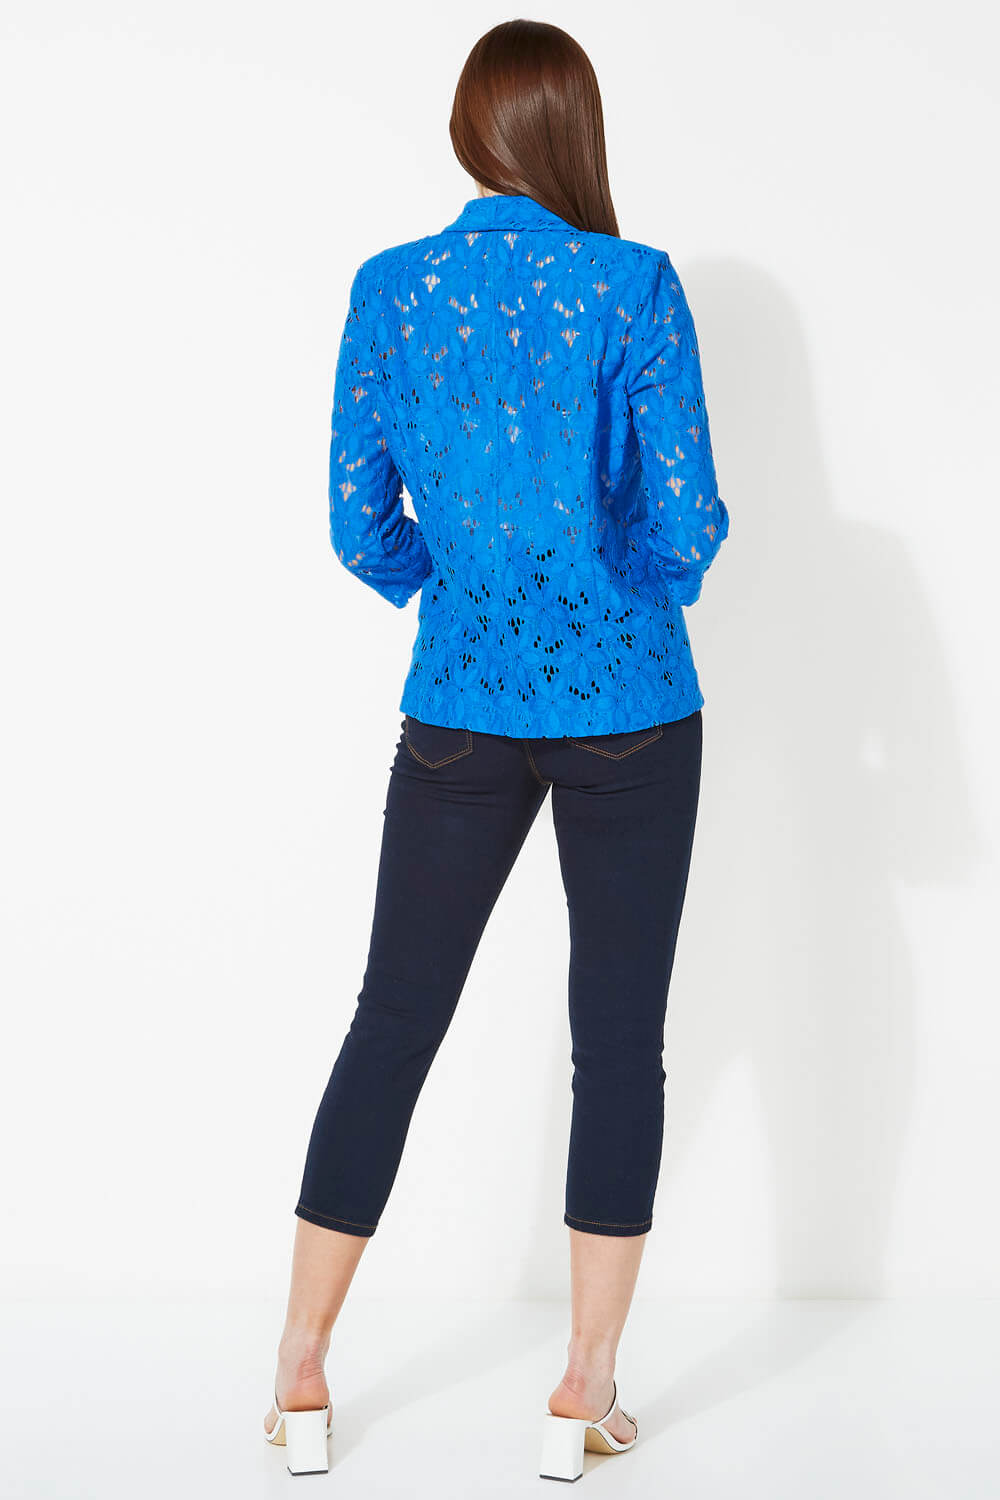 Floral Lace 3/4 Sleeve Jacket